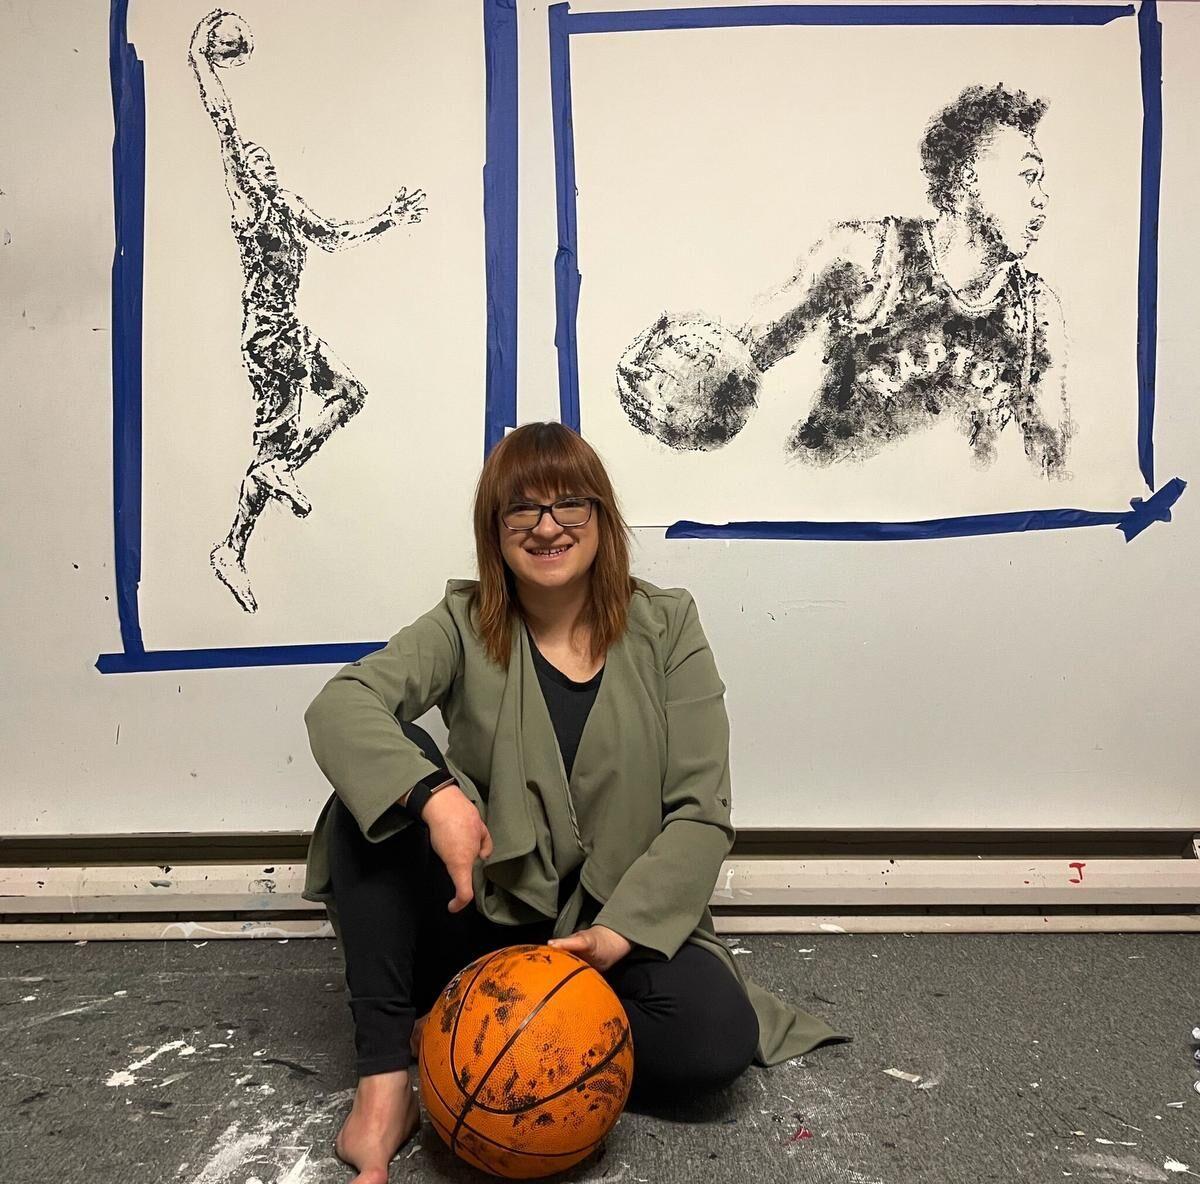 Canadian artist paints Raptors using a basketball as a brush